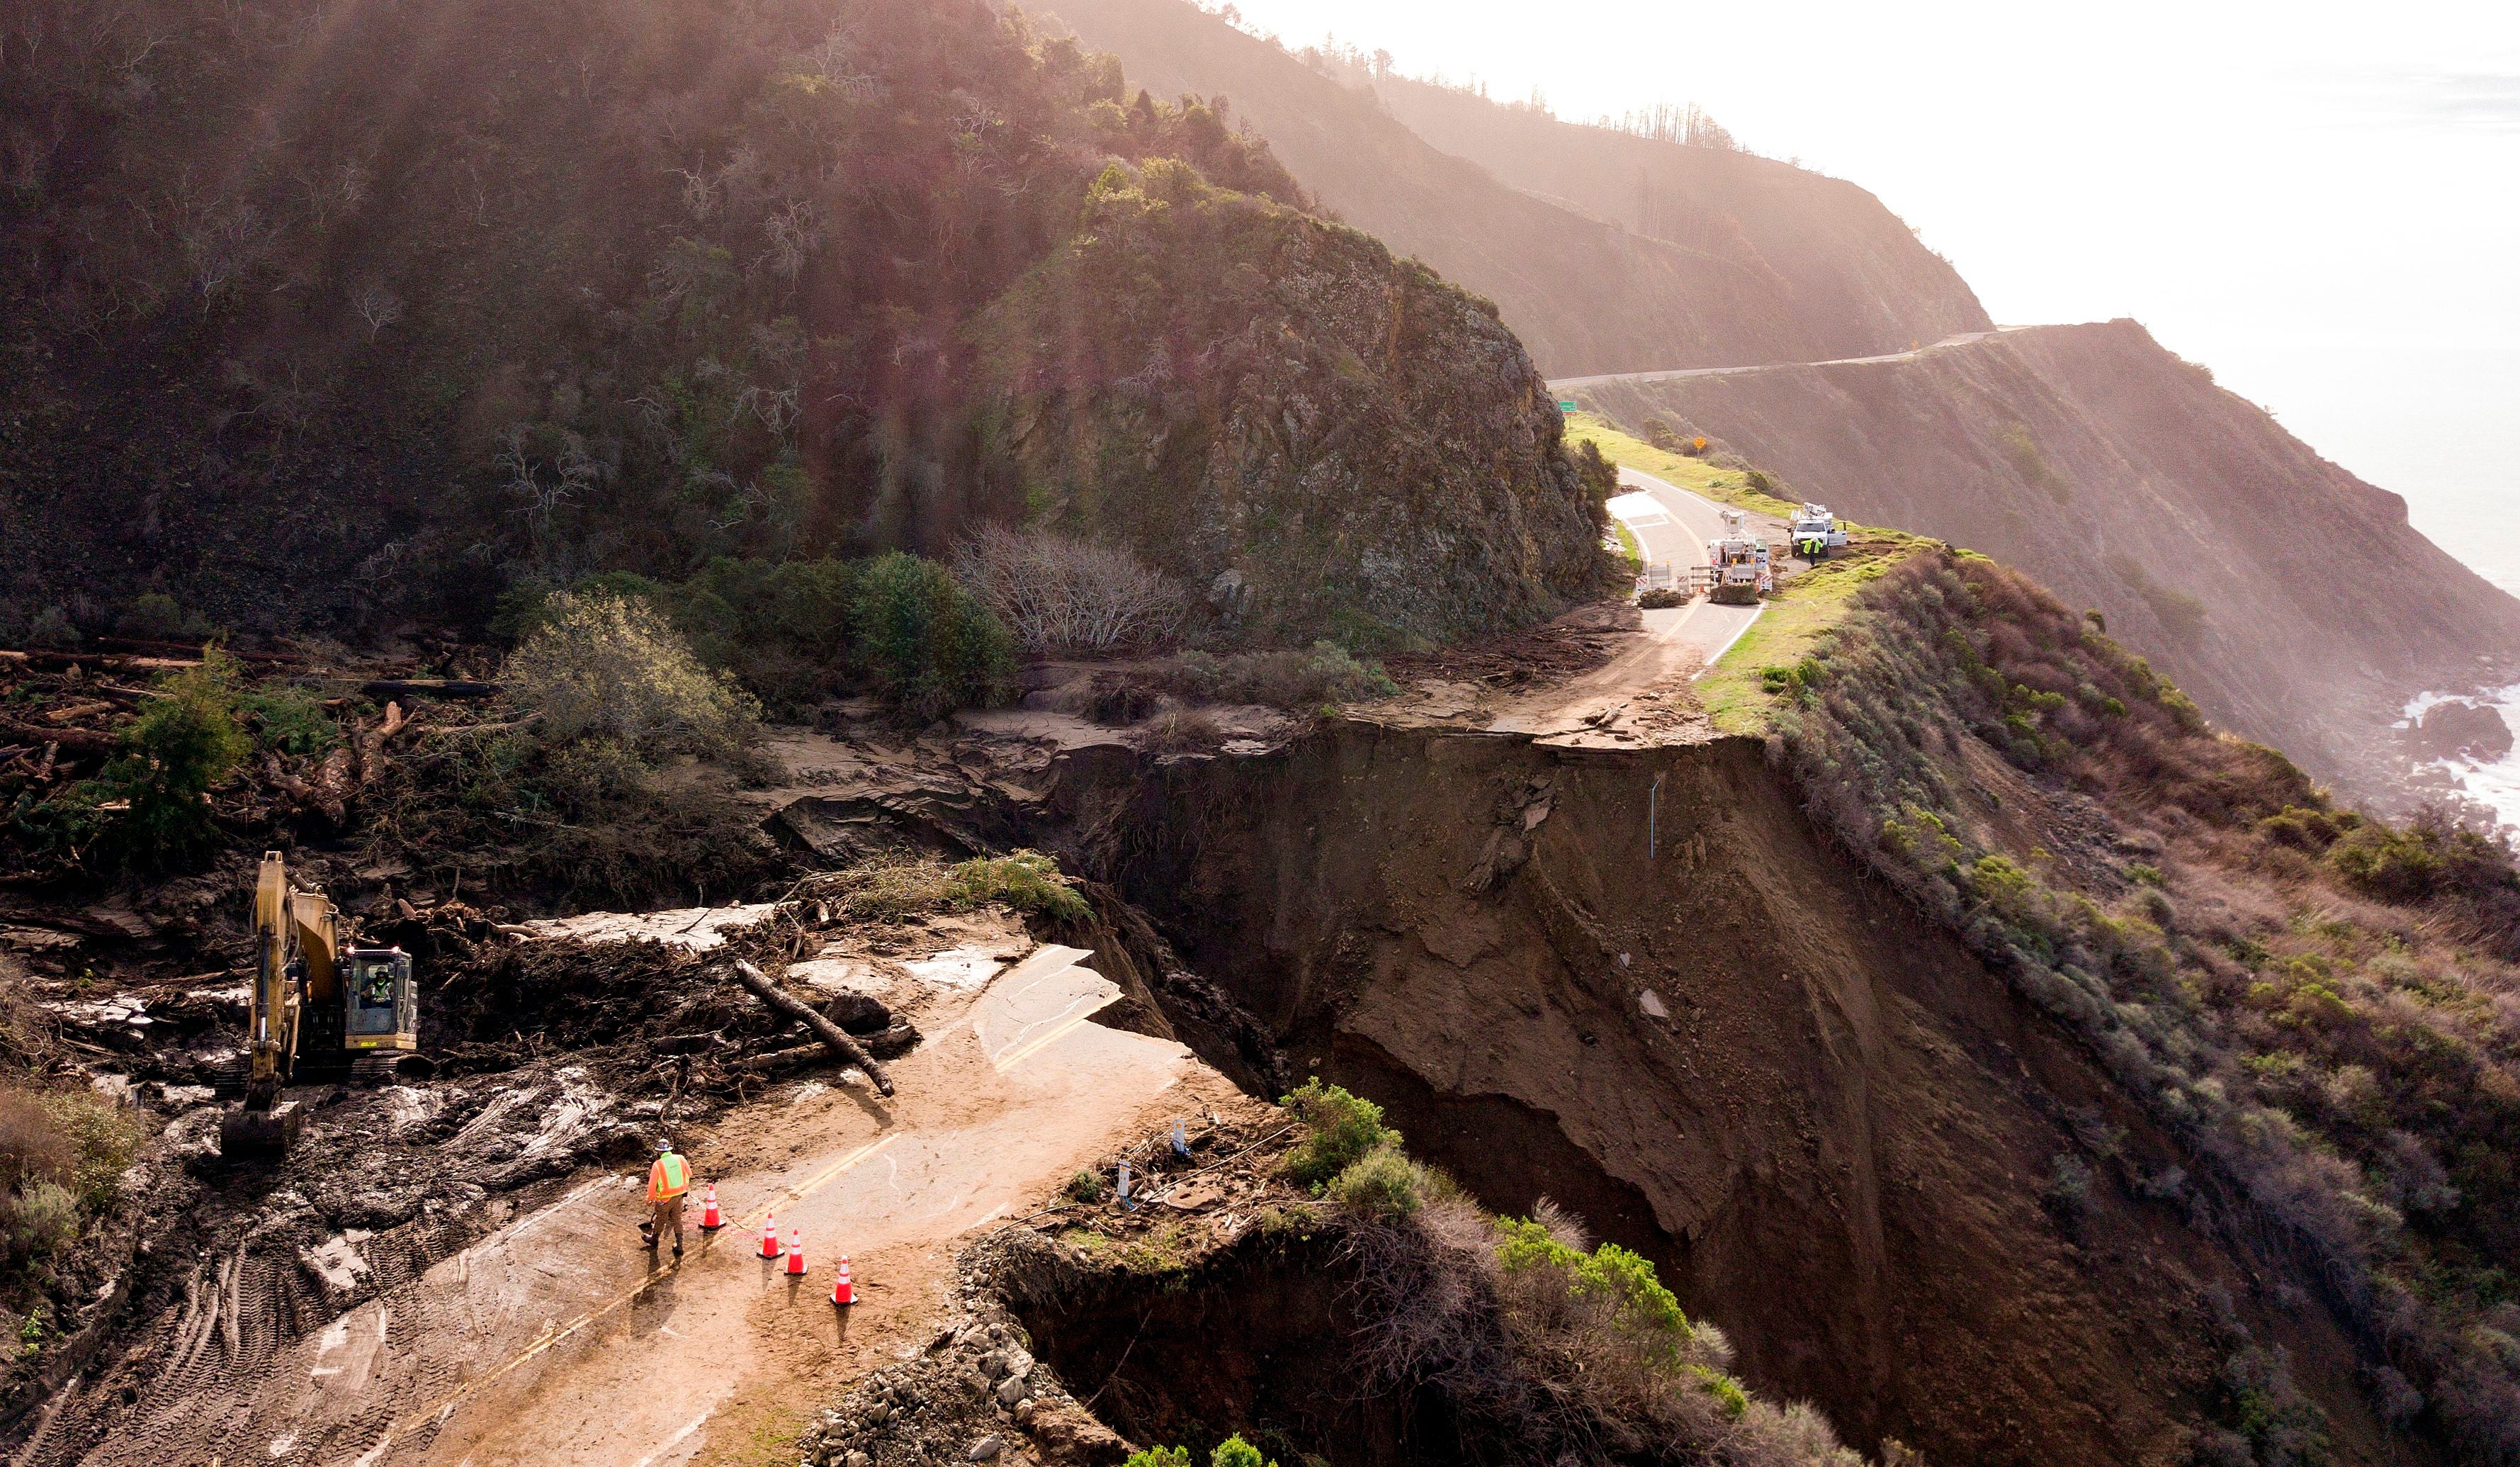 Construction crews work on a section of Highway 1, which collapsed into the Pacific Ocean near Big Sur, California on January 31, 2021. Heavy rains caused debris flows of trees, boulders and mud that washed out a 150-foot section of the road.